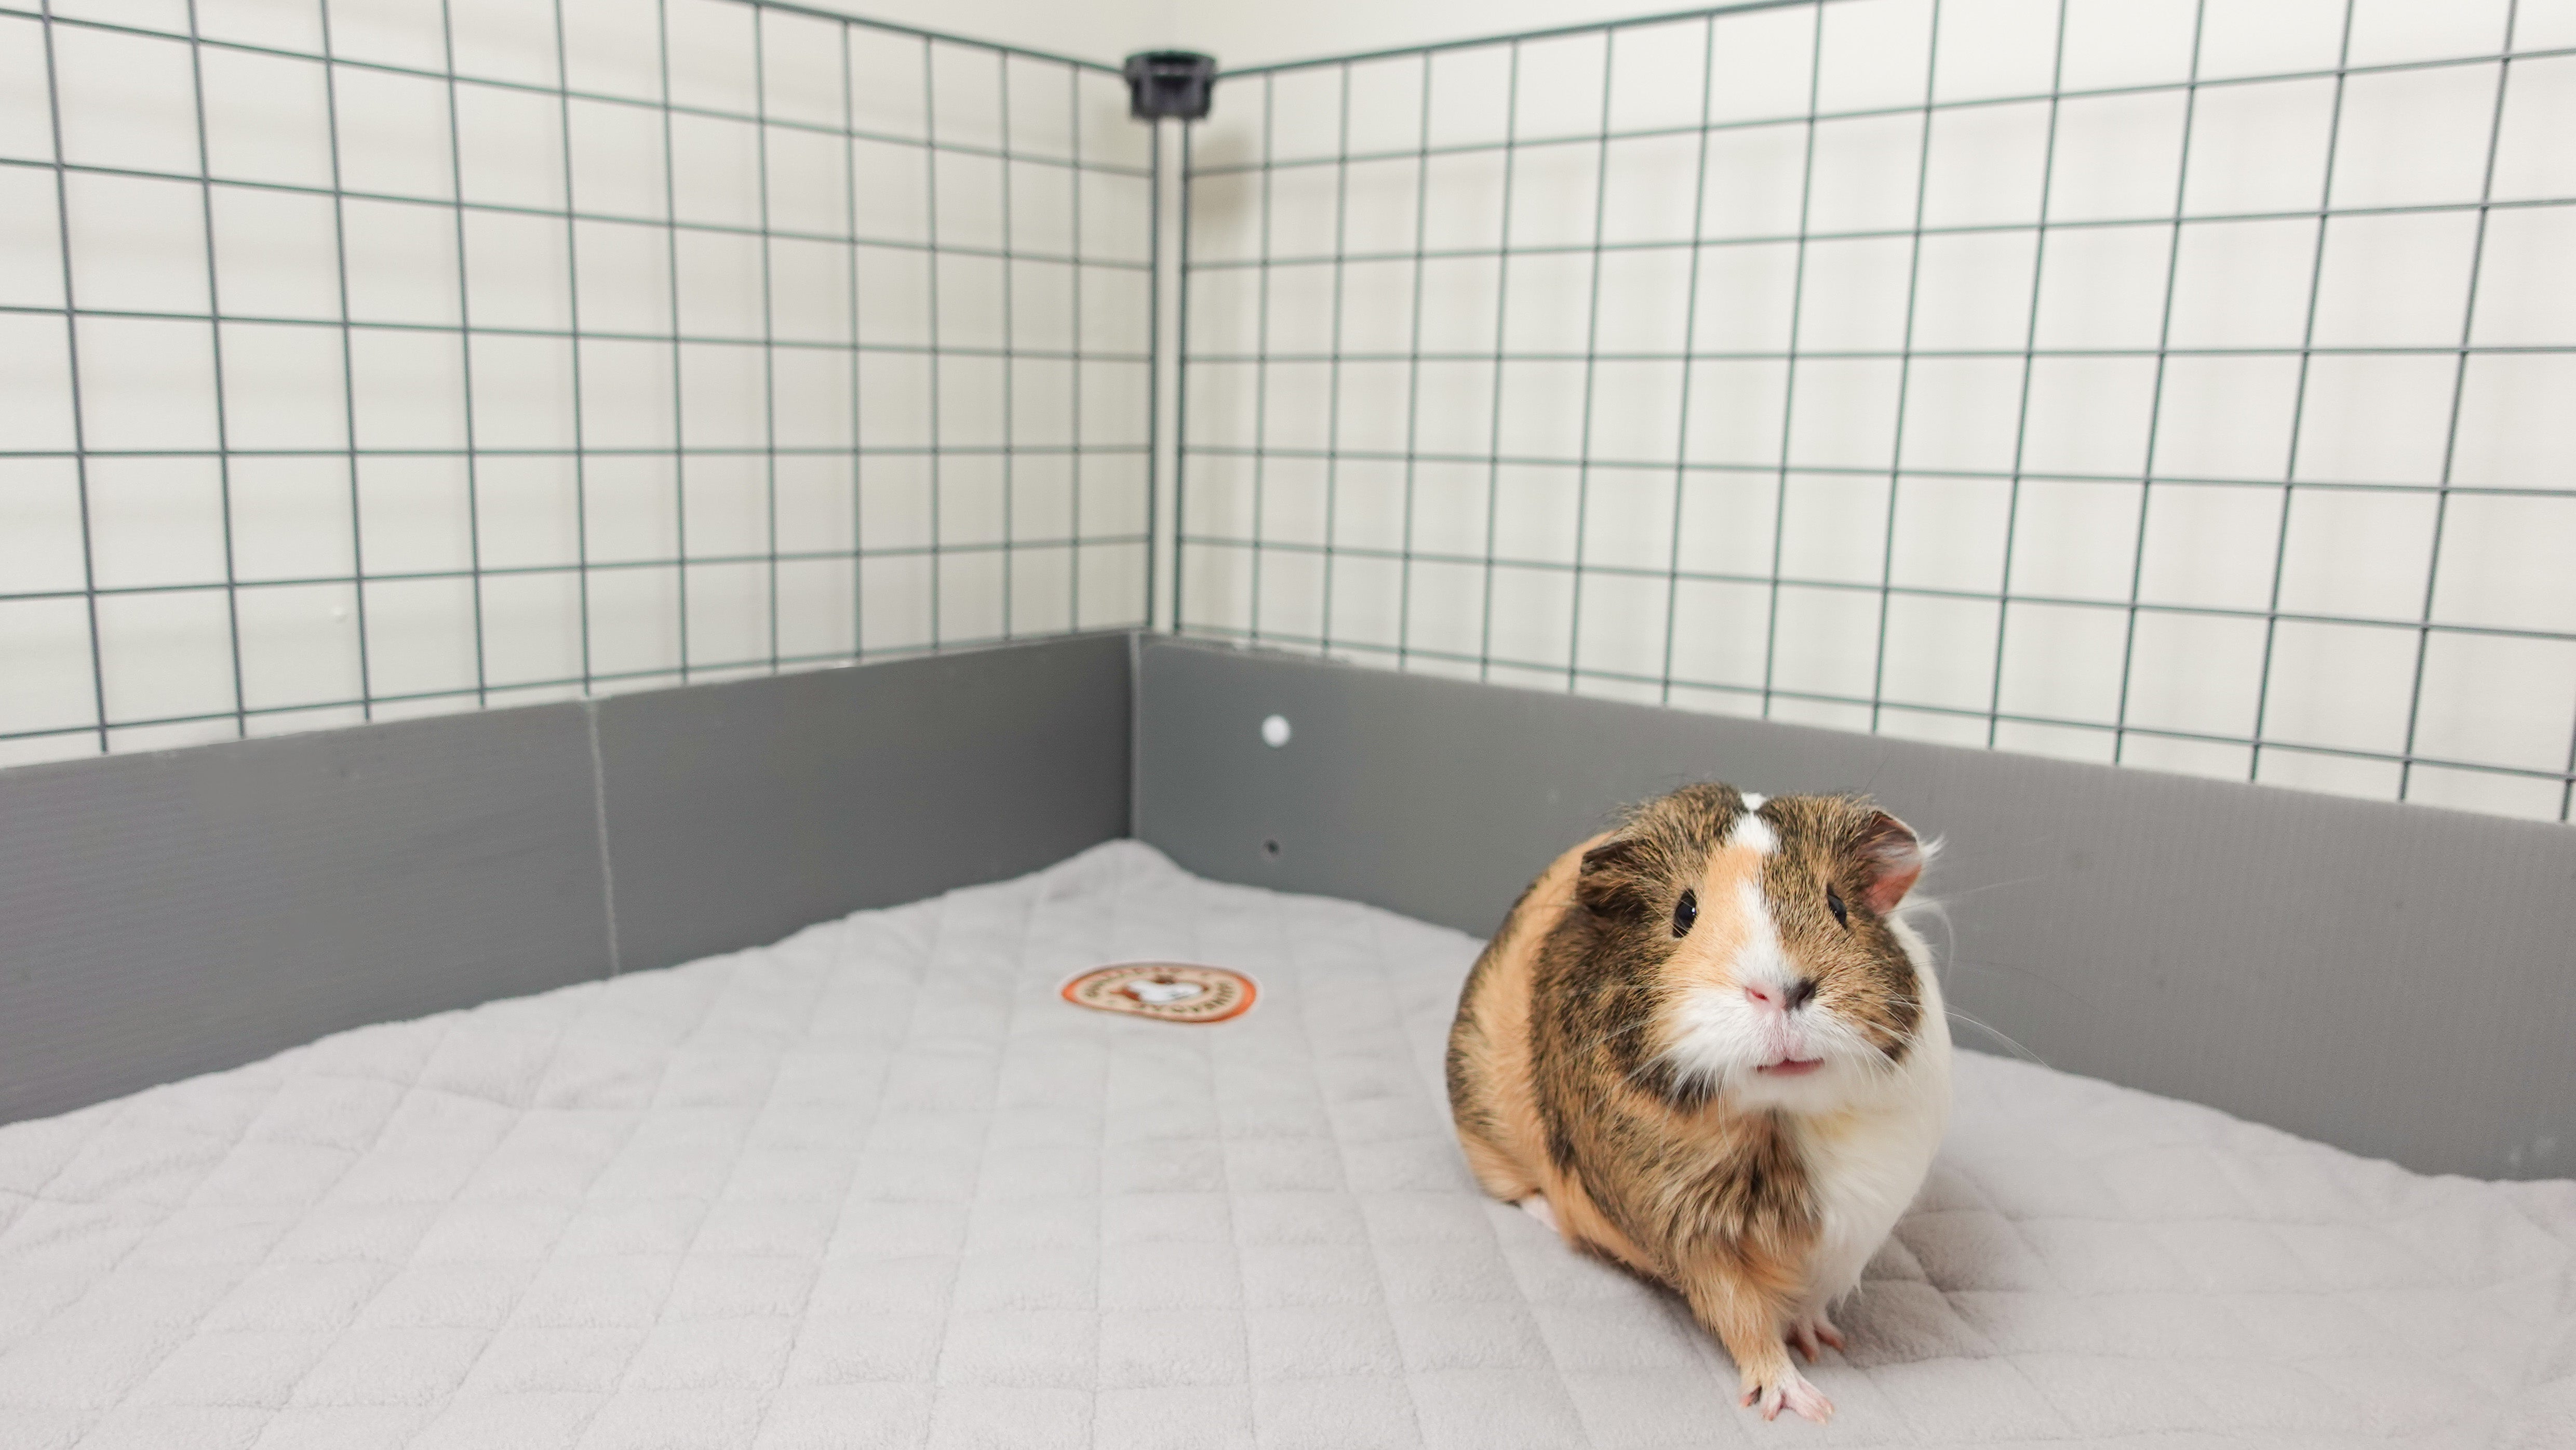 Environment - Best Location for Guinea Pig Cage